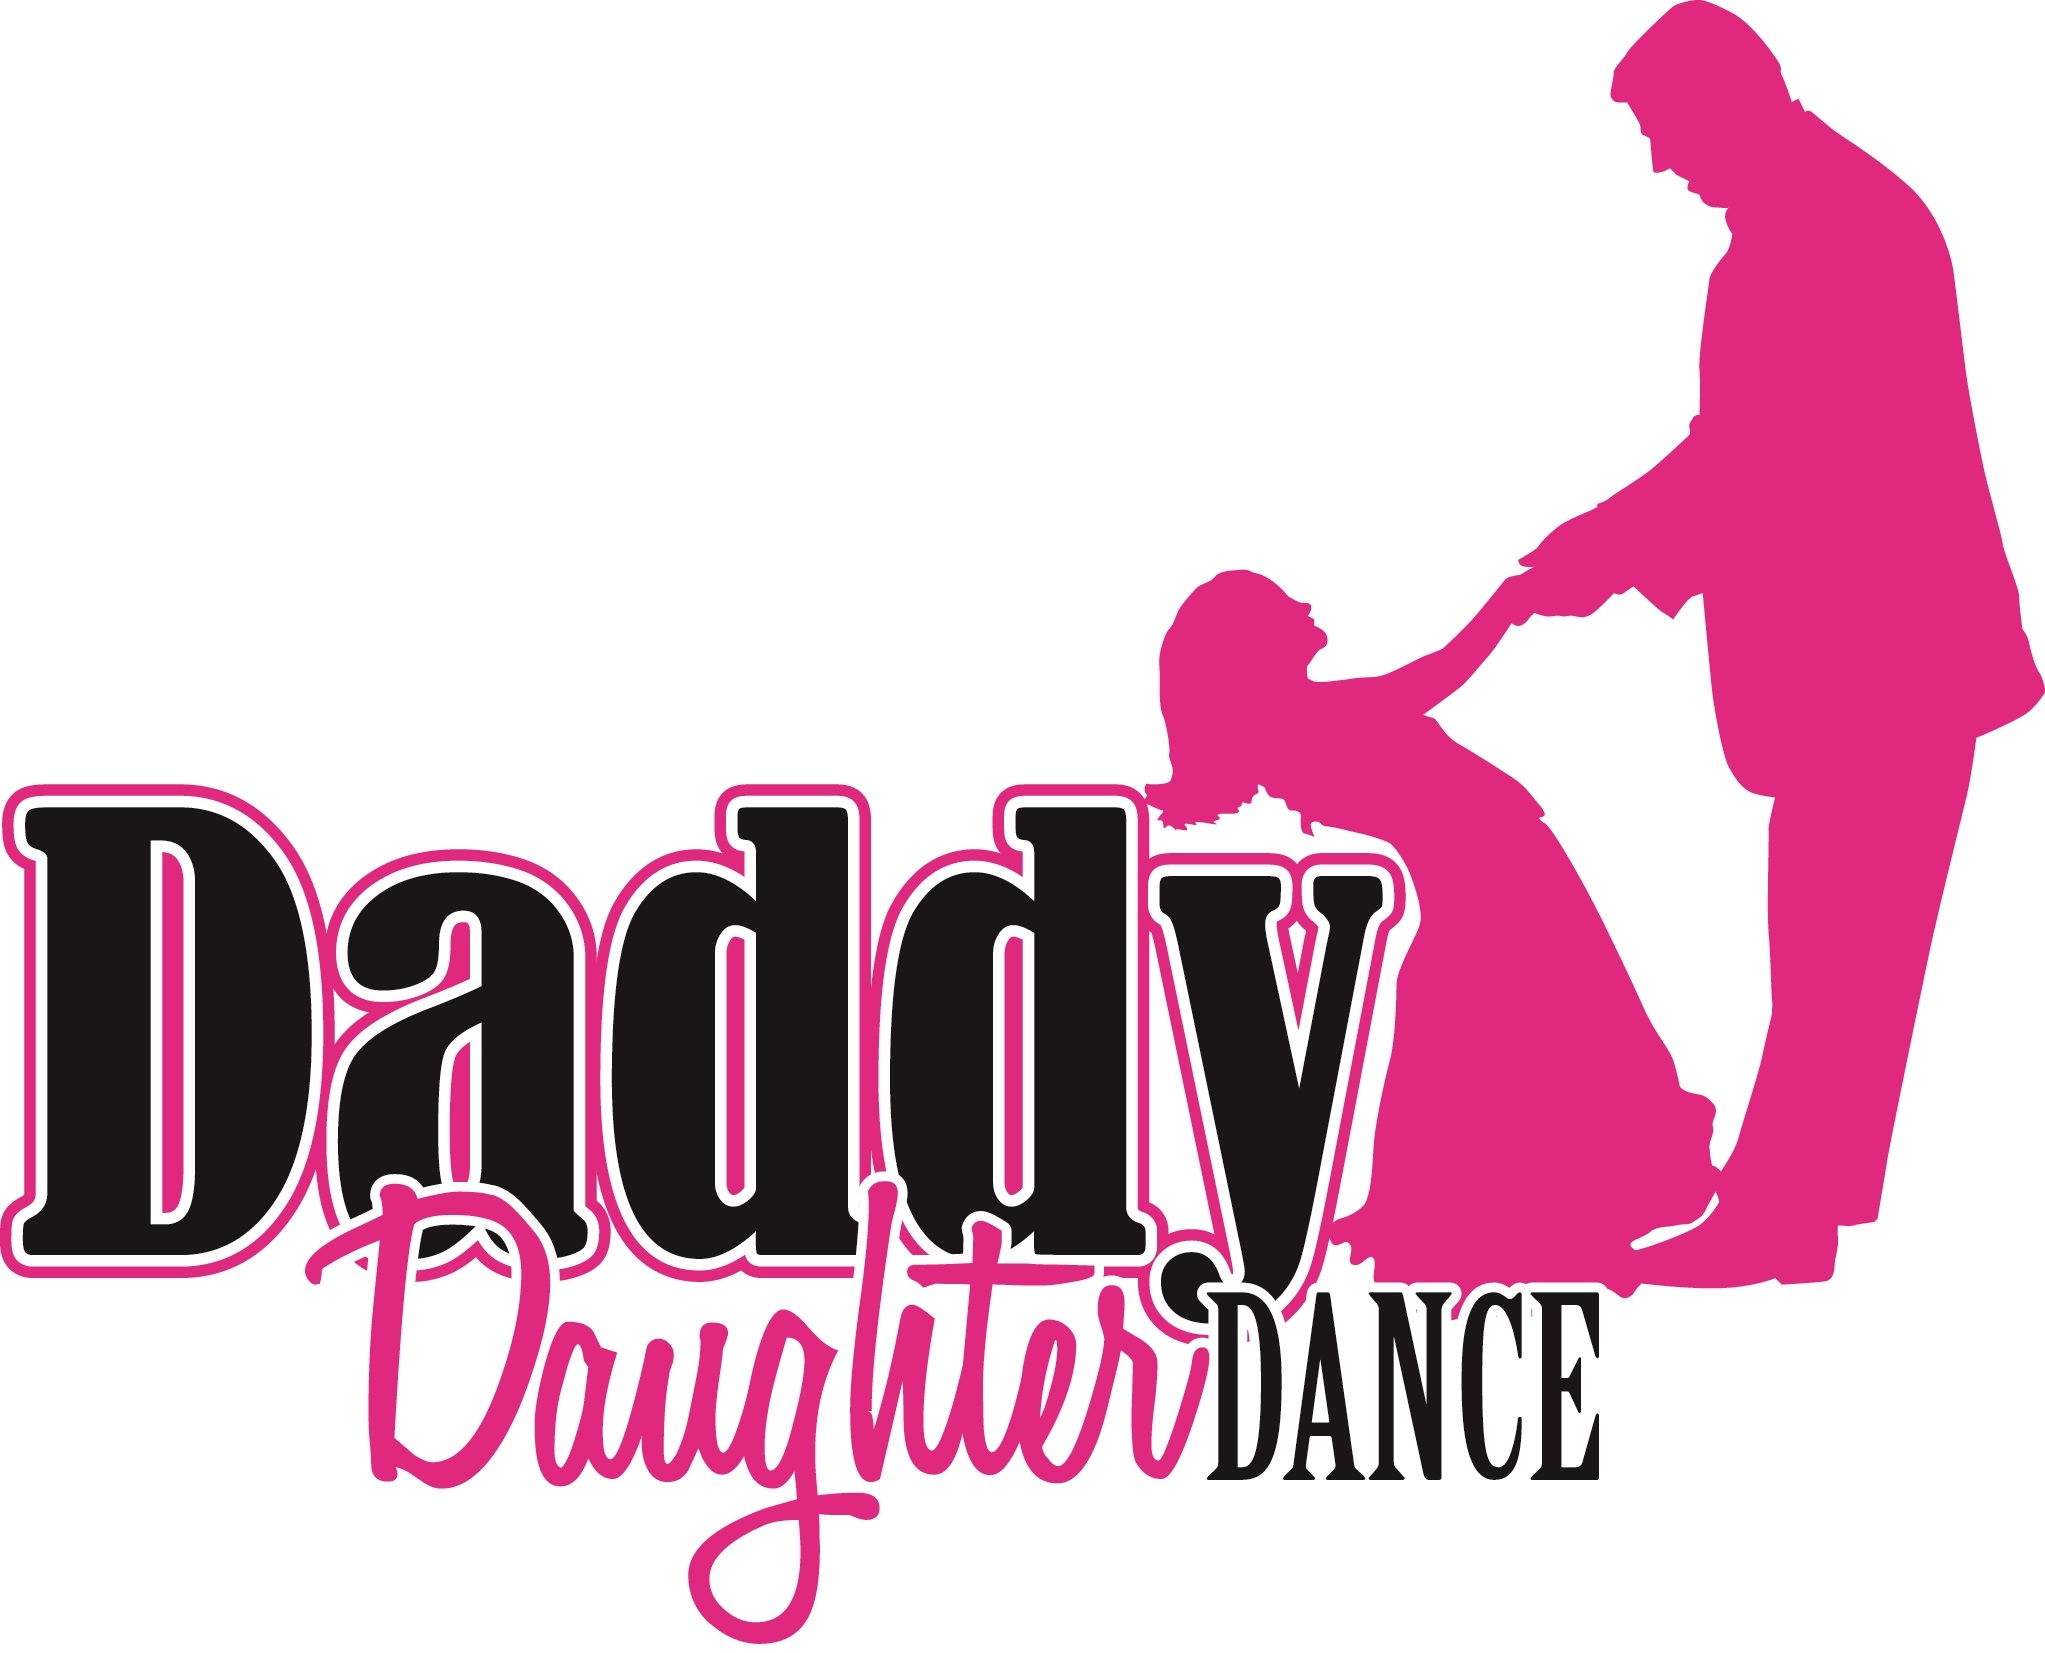 ... Daddy daughter dance clip